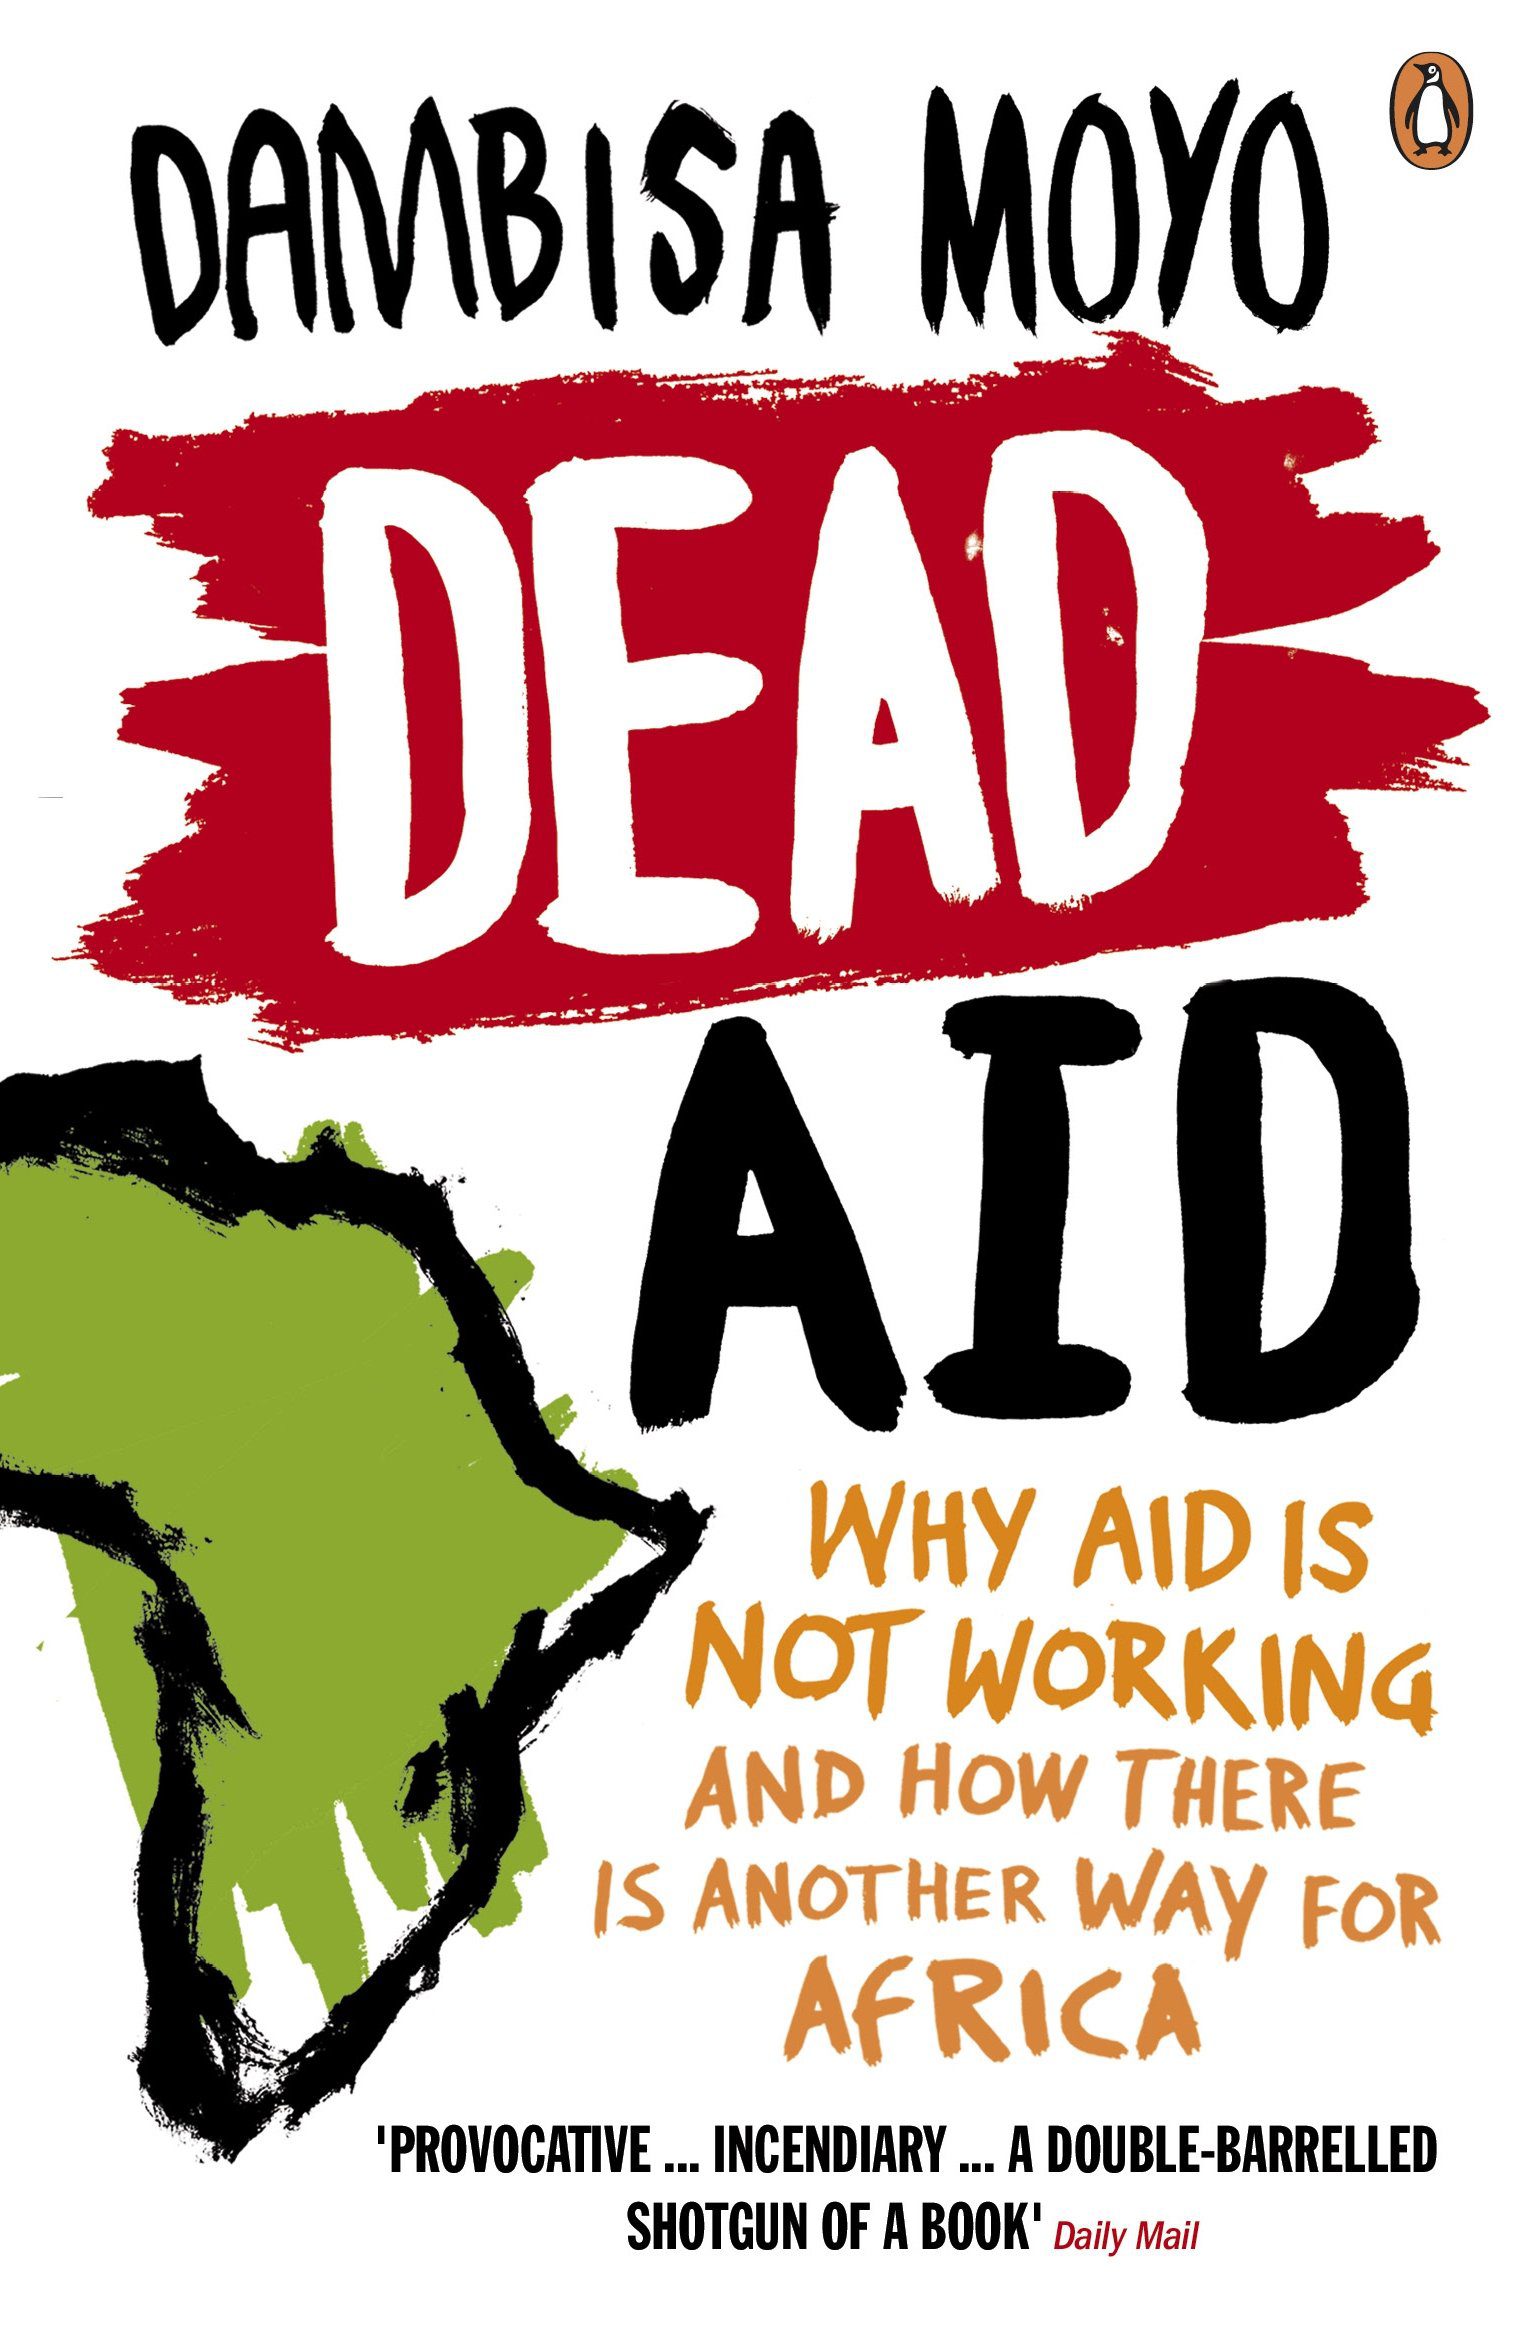 dambisa moyo dead aid, Dead Aid: Why Aid Is Not Working and How There Is a Better Way for Africa